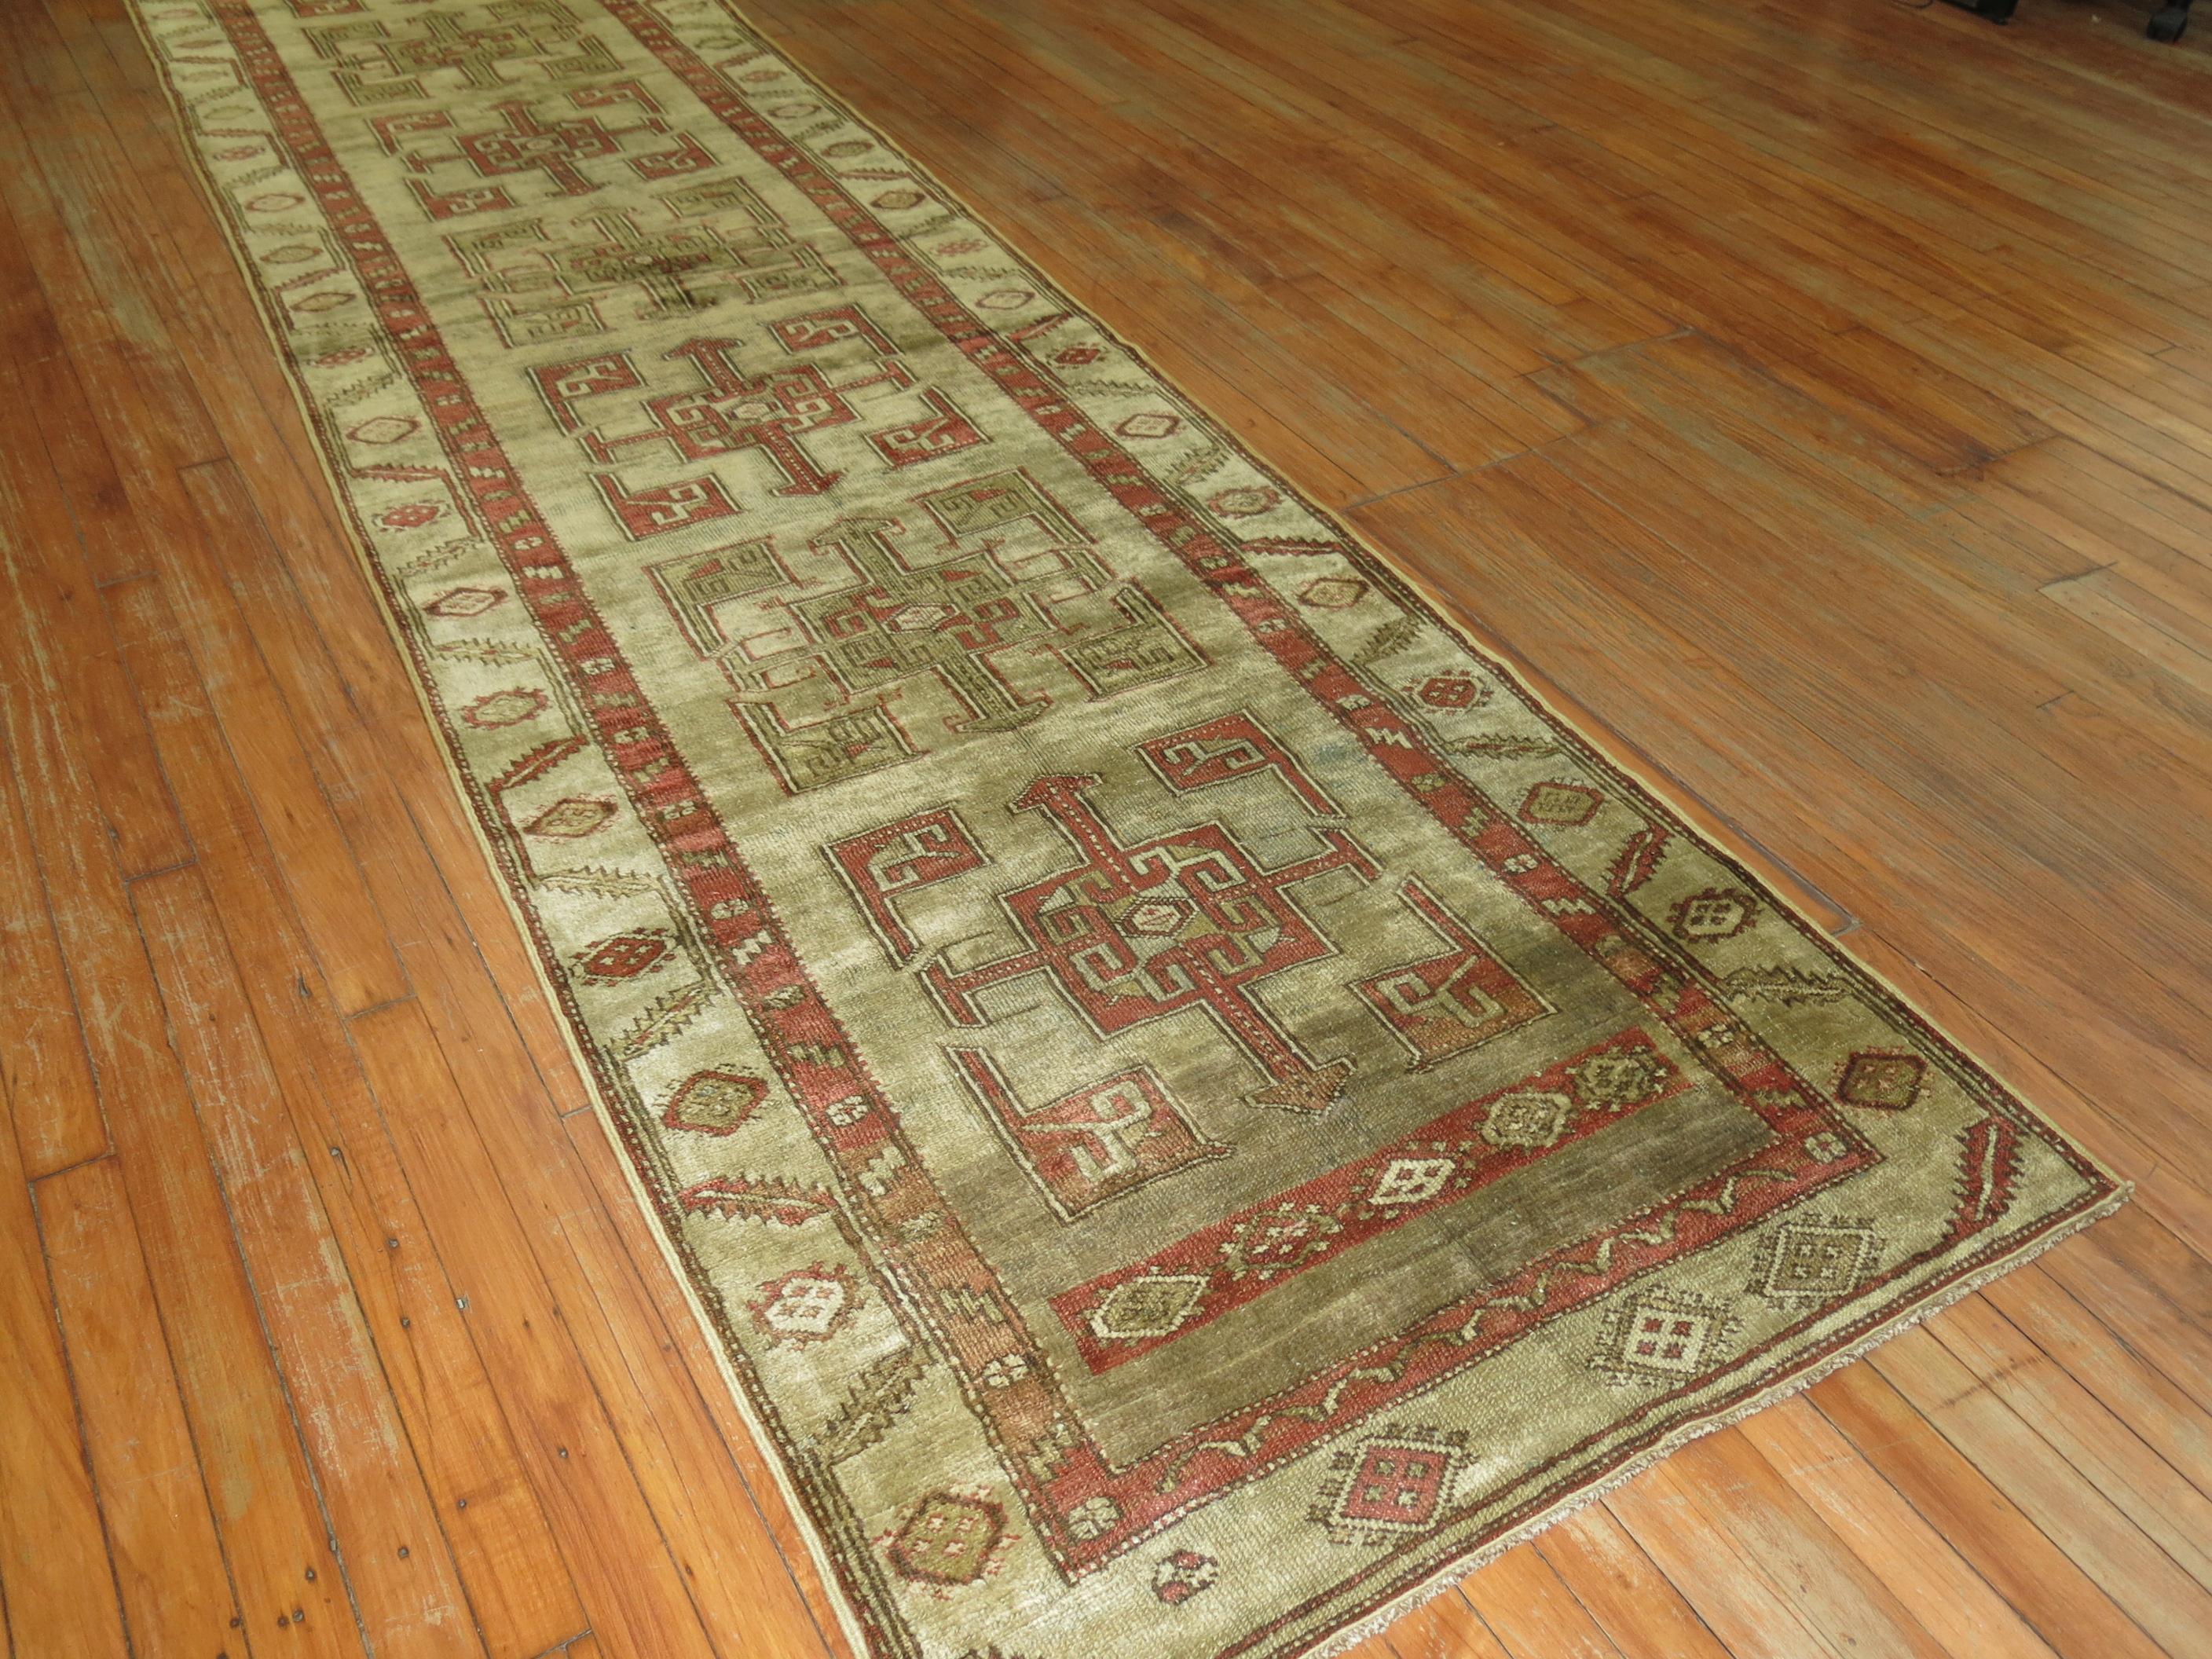 Early 20th century Persian Malayer Kurd runner with Tribal elements that derive from 19th century Persian Bakshaish rugs.

Measures: 3'2'' x 12'9.

